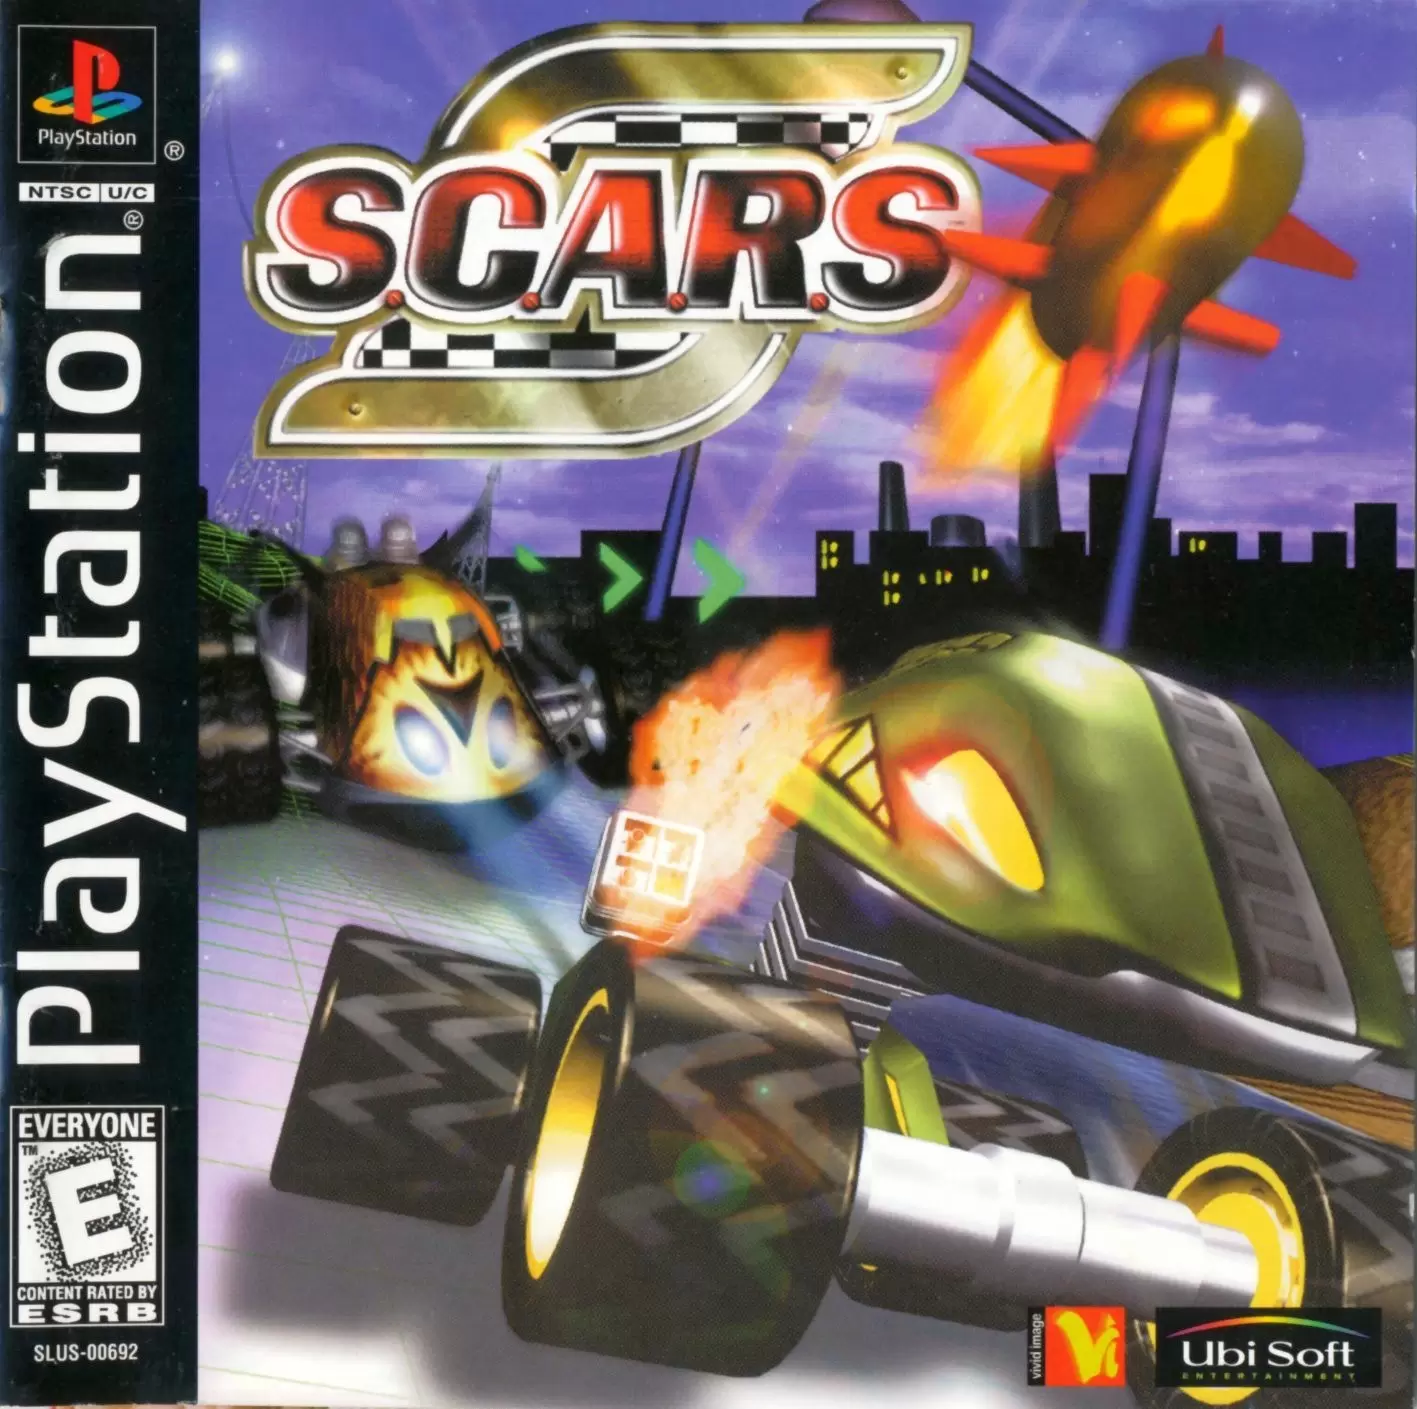 Playstation games - S.C.A.R.S.